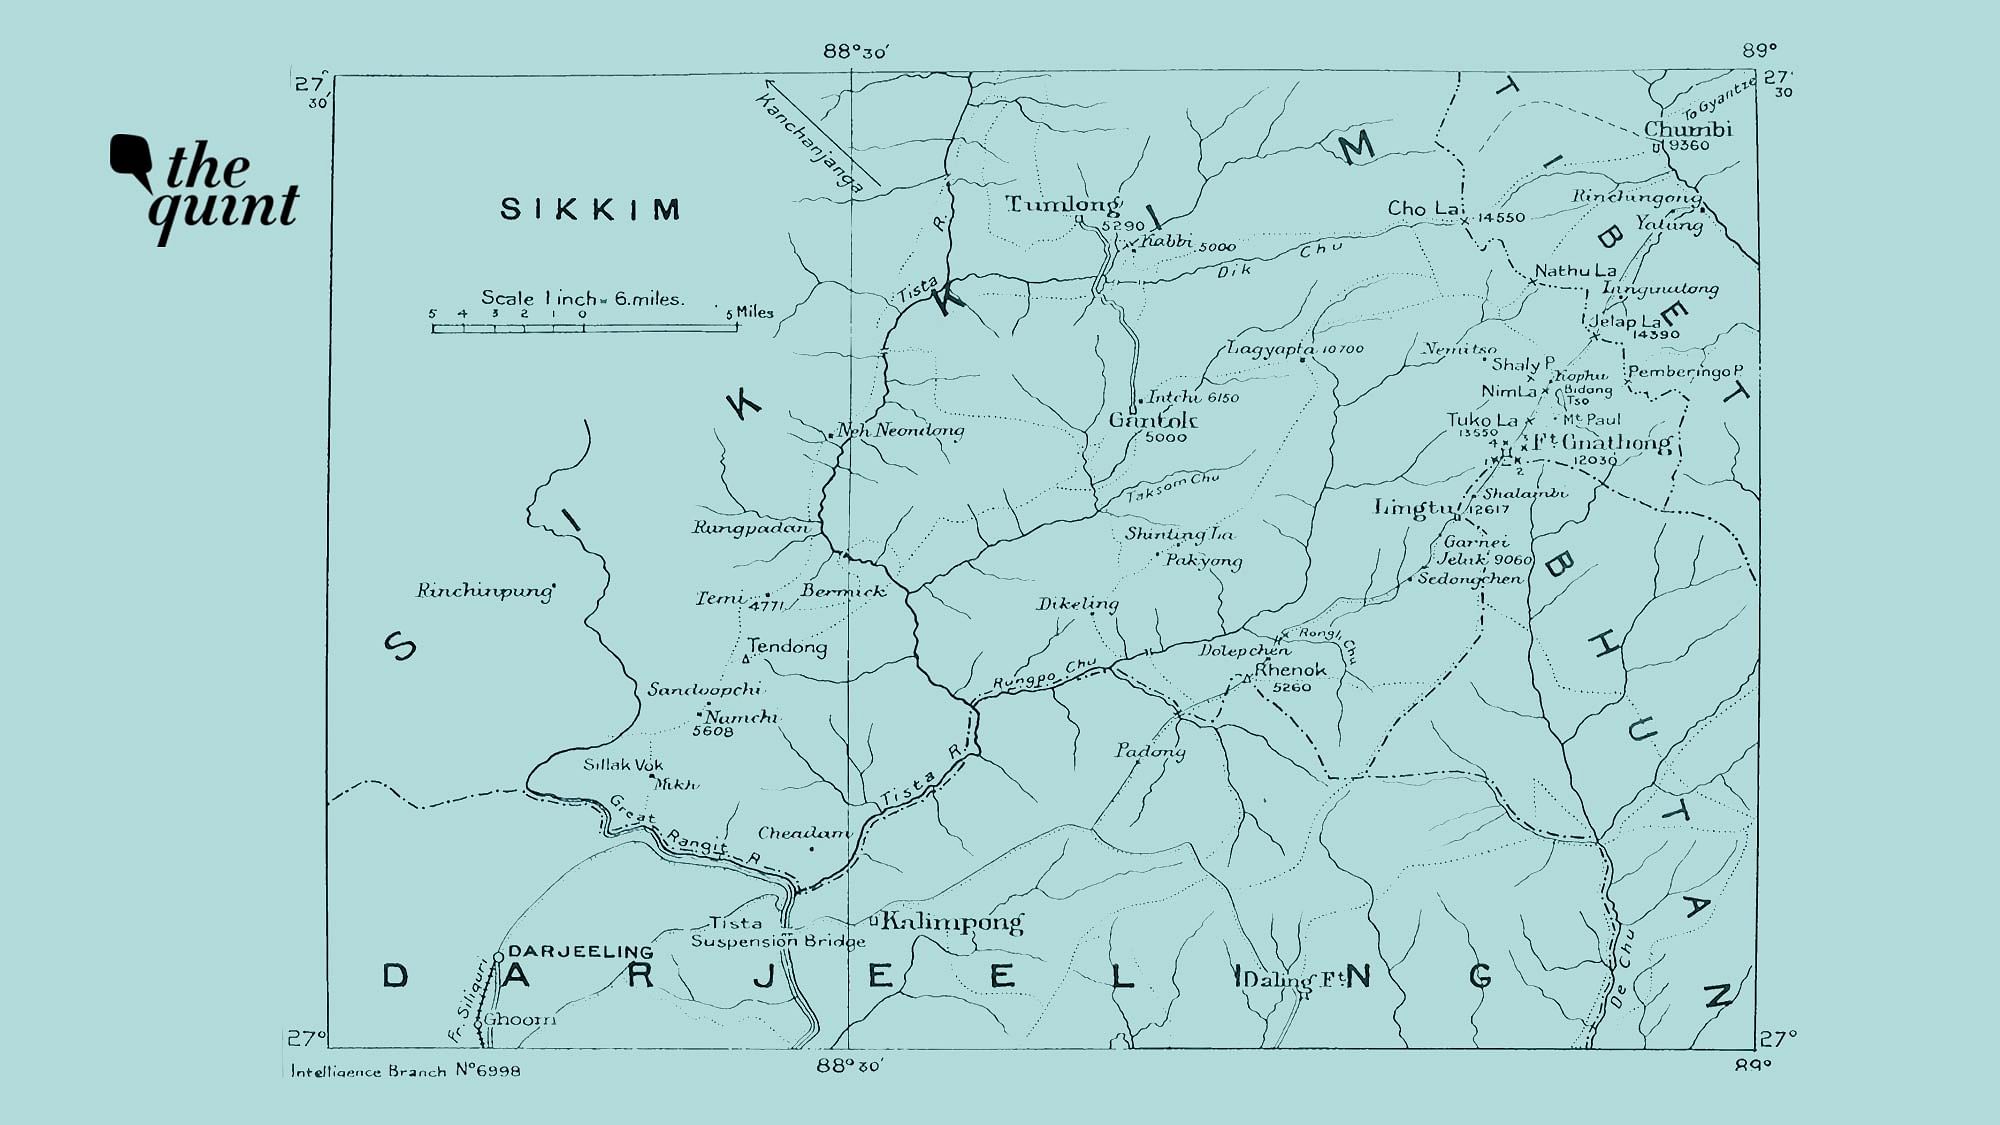 China’s claim along the Sikkim-Bhutan border can be easily countered using historical documents.